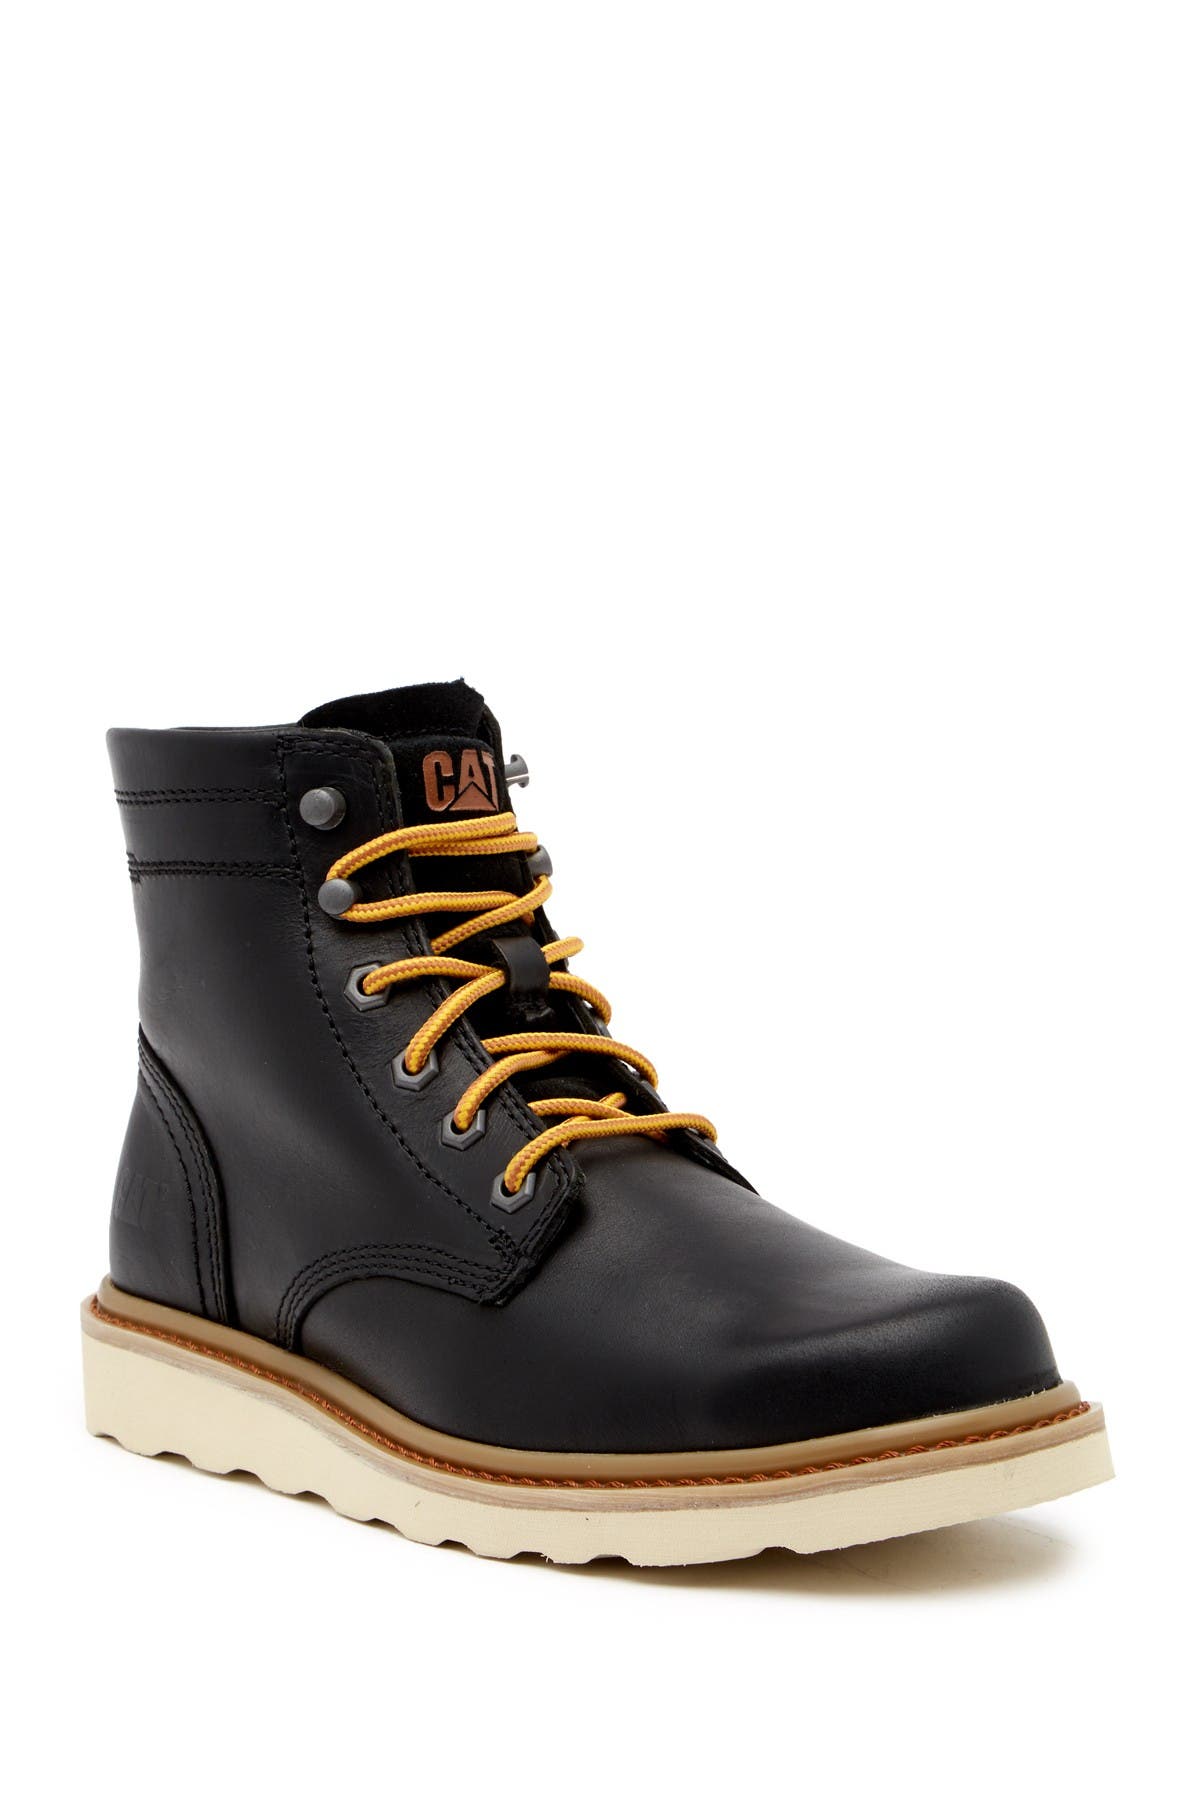 CAT Footwear | Chronicle Boot 